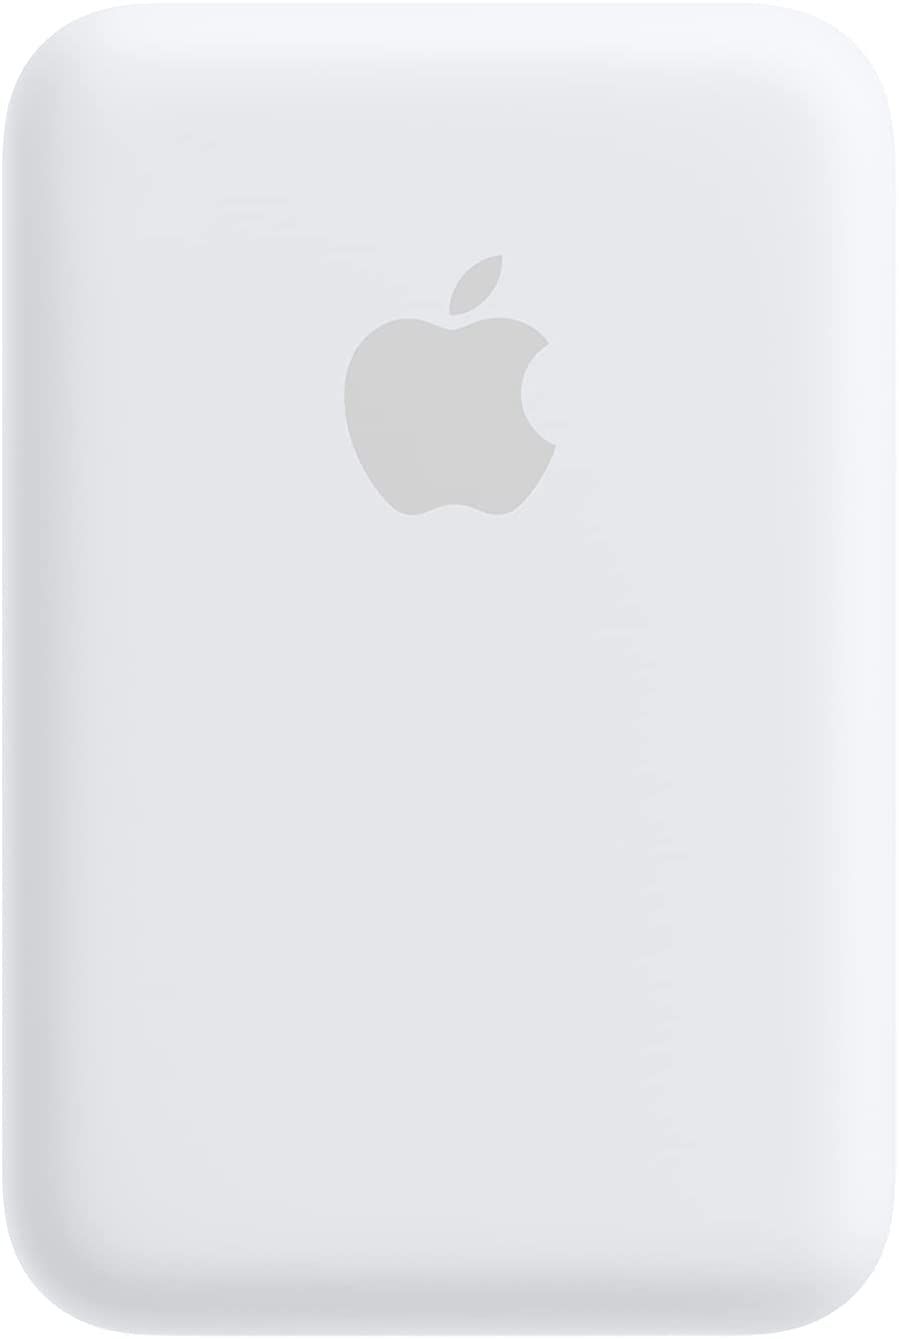 apple magsafe battery pack 1